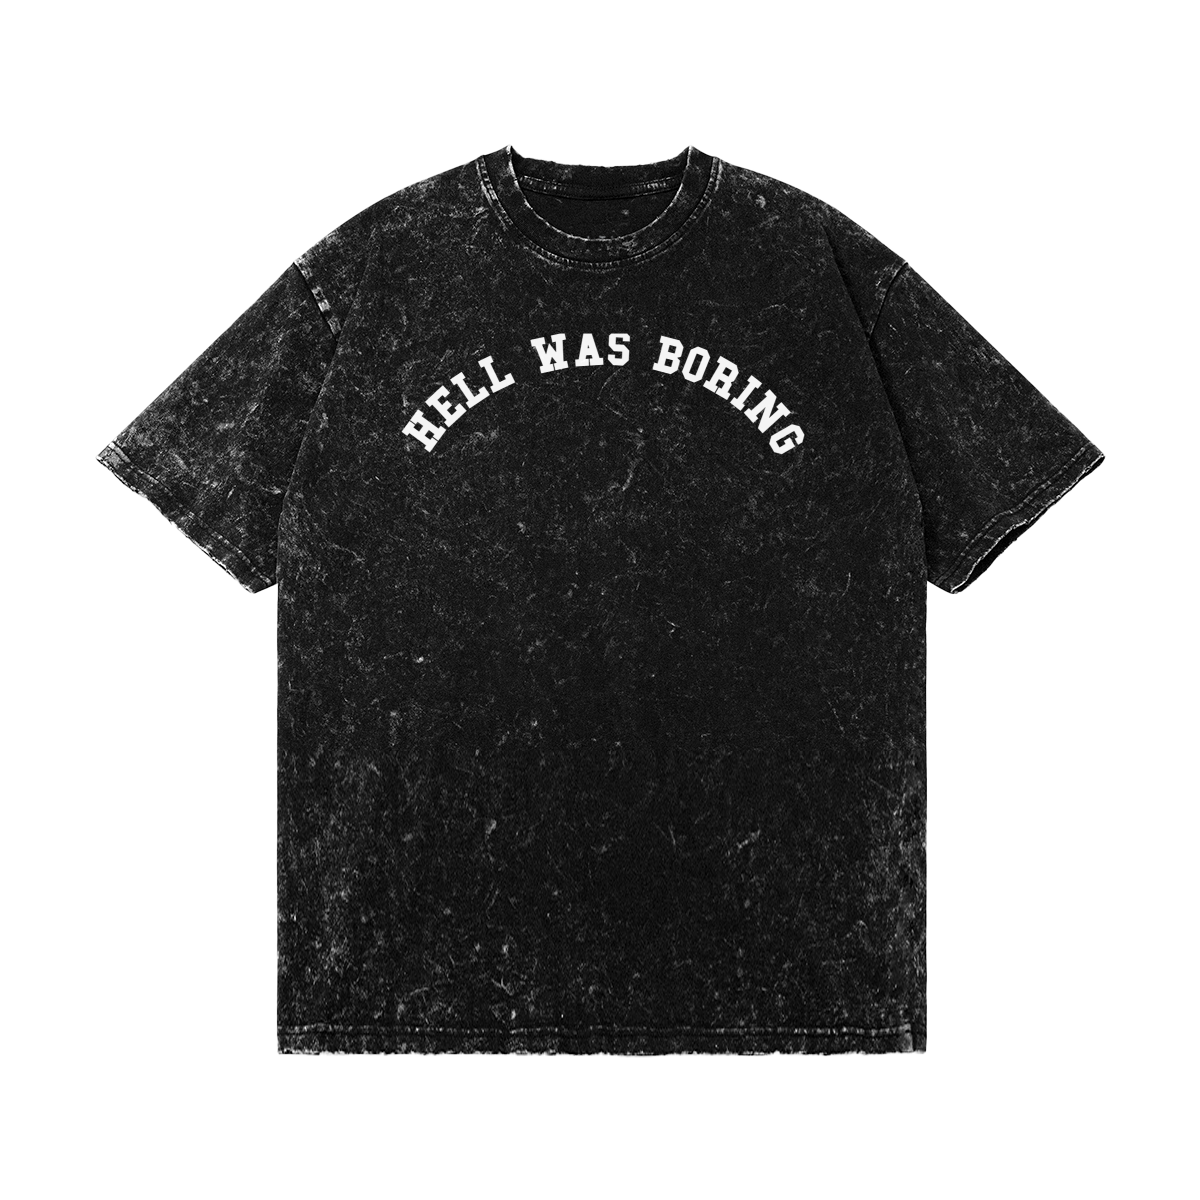 Hell Was Boring in Distressed Black